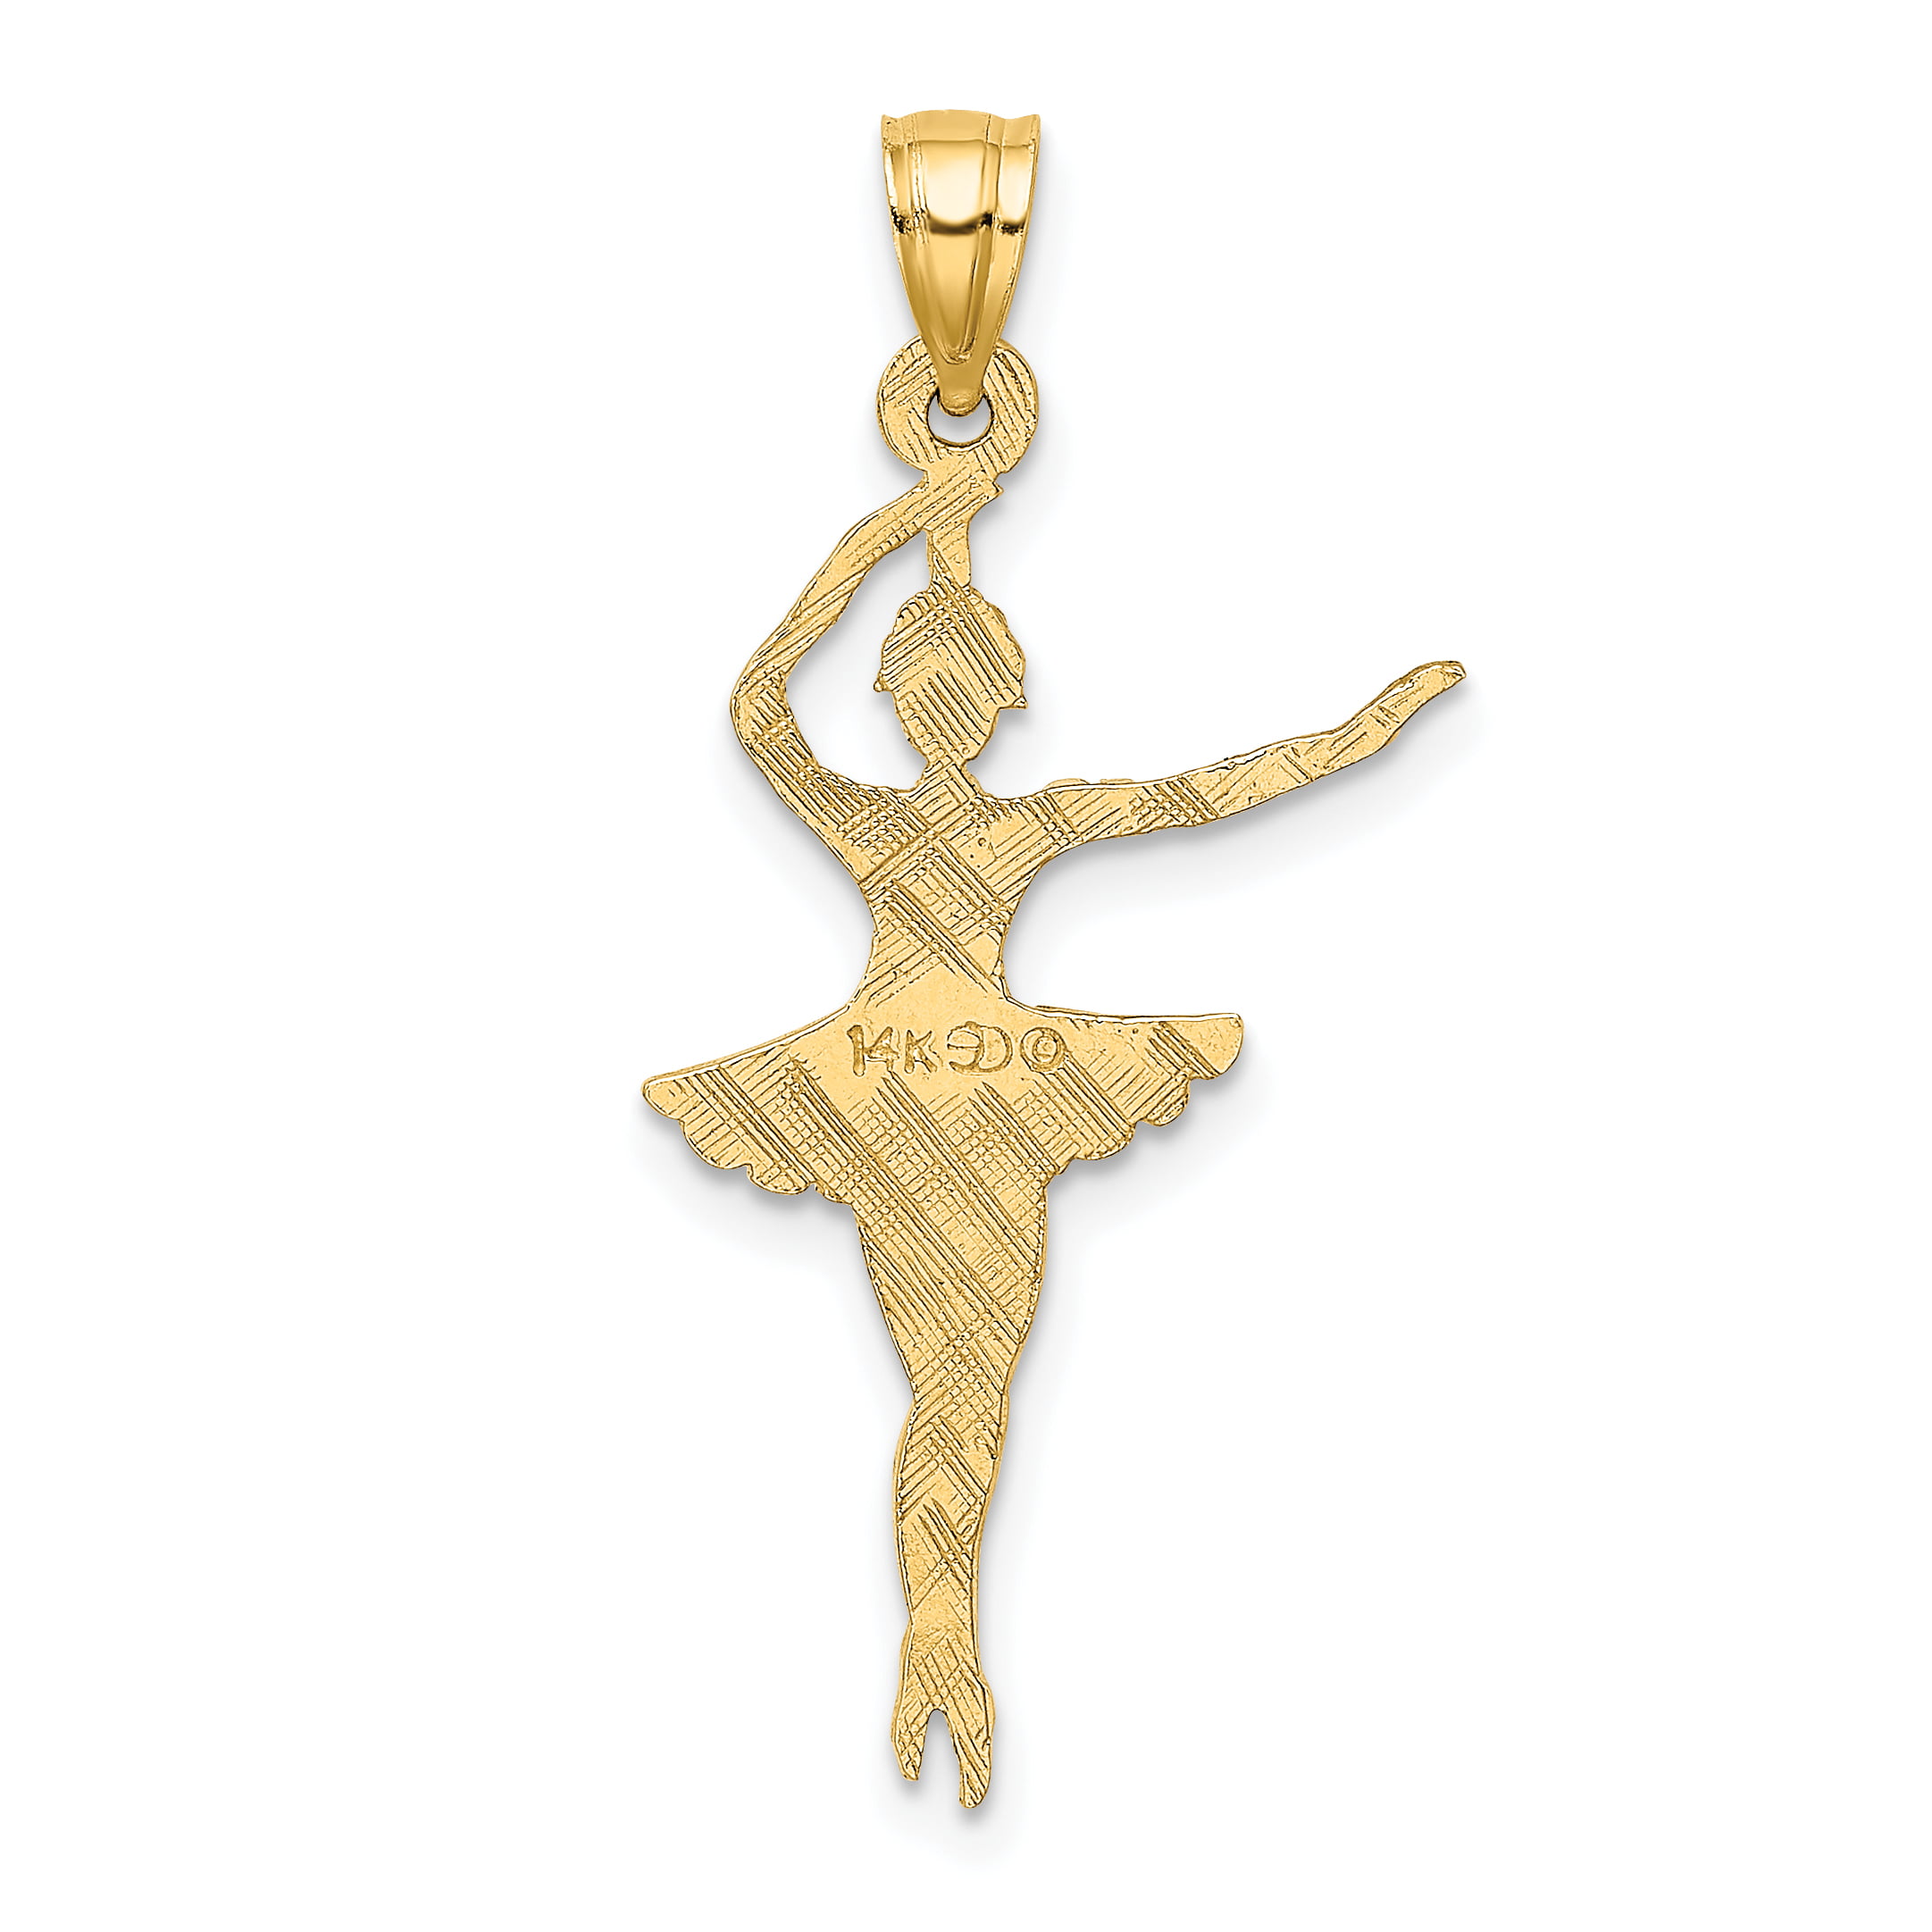 Jewels By Lux 14K Yellow Gold Satin Polished Ballerina Charm Pendant